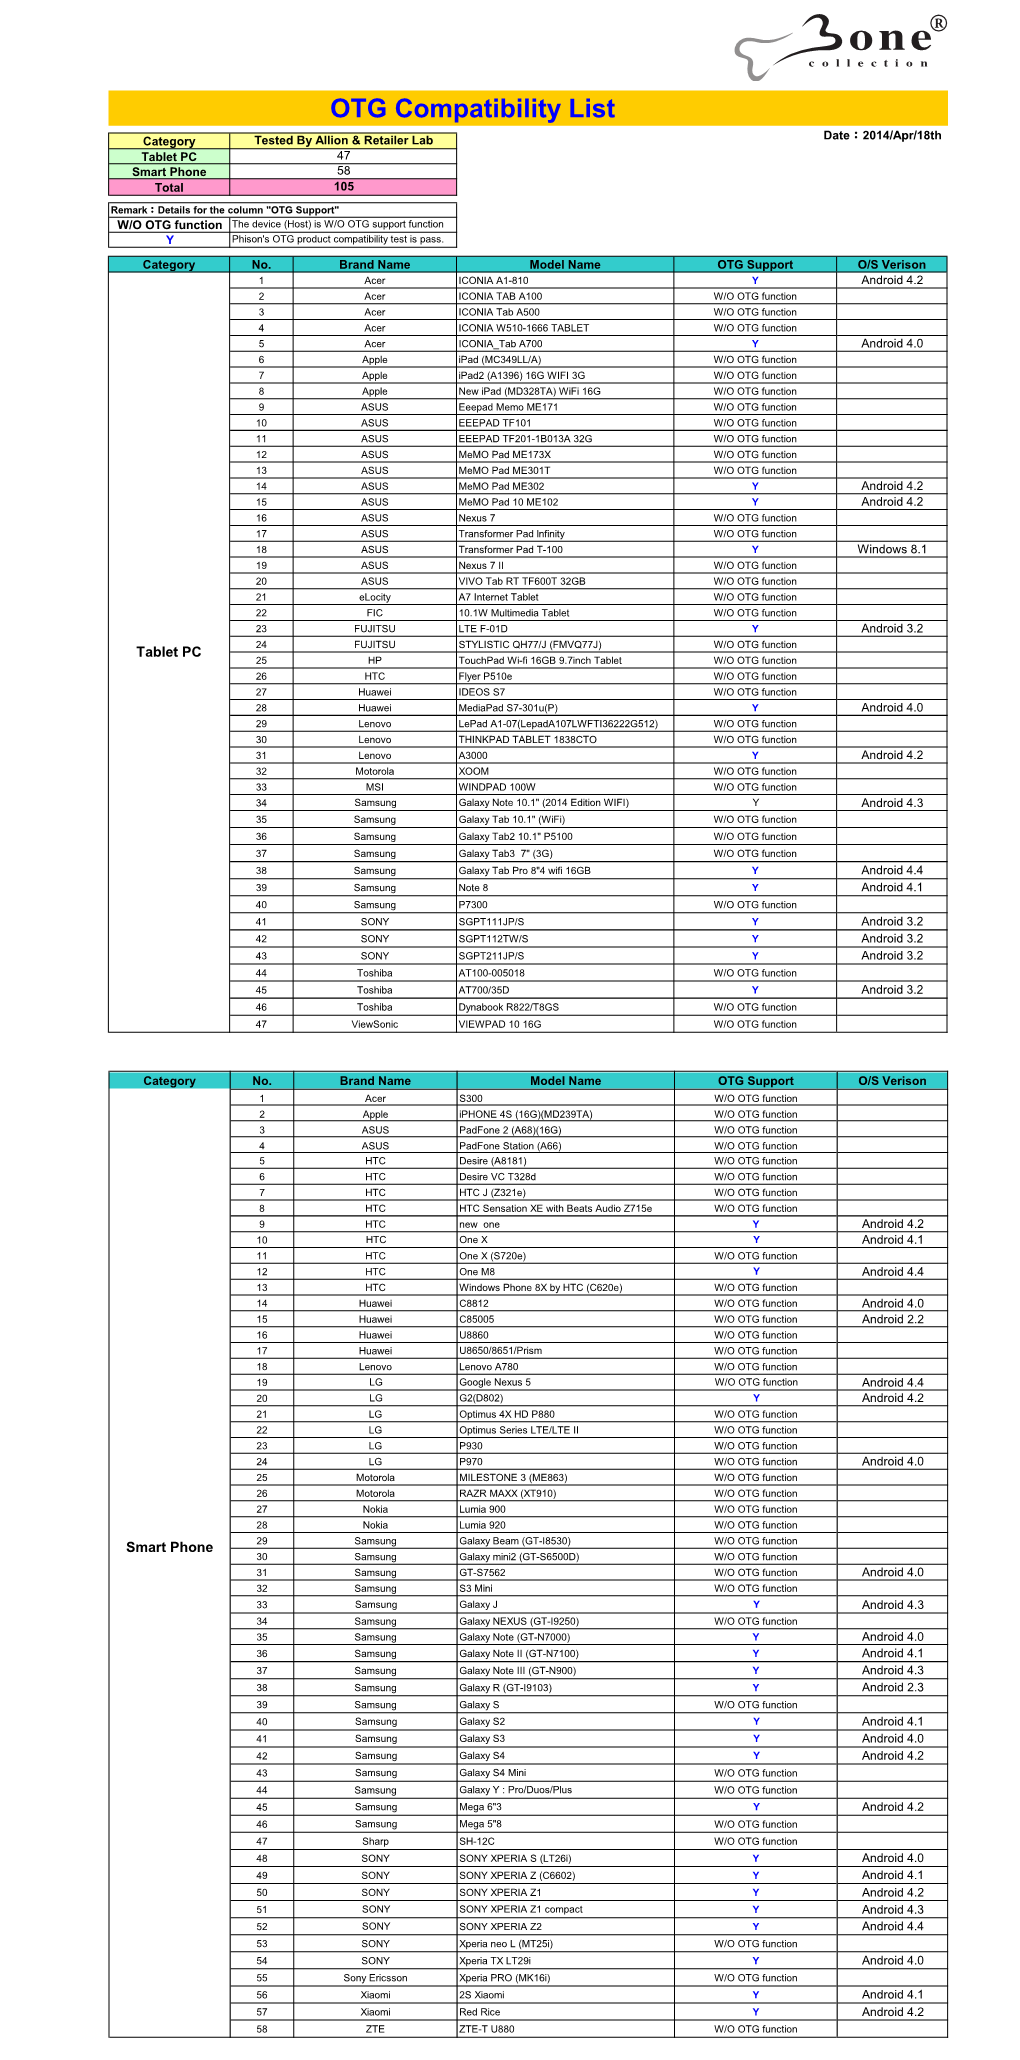 OTG Compatibility List ： Category Tested by Allion & Retailer Lab Date 2014/Apr/18Th Tablet PC 47 Smart Phone 58 Total 105